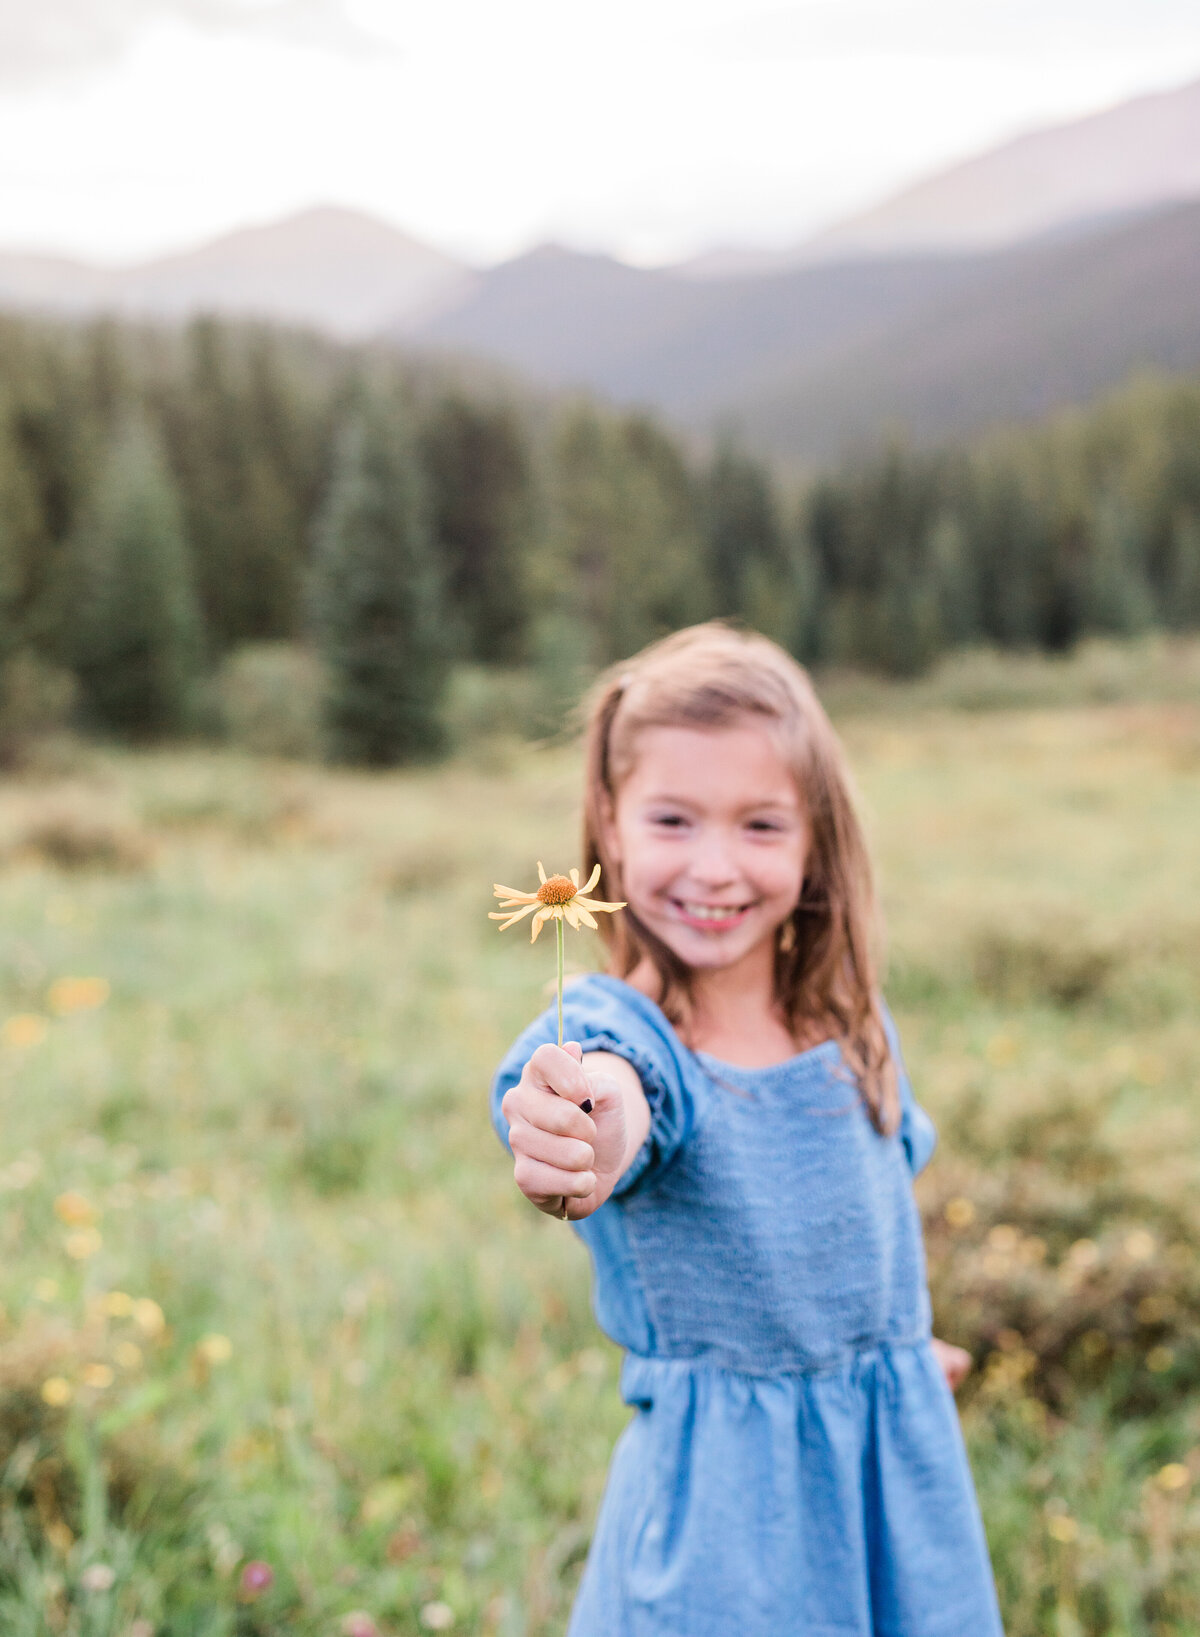 A young girl in a blue dress holds out a yellow flower she has picked from the field behind her.